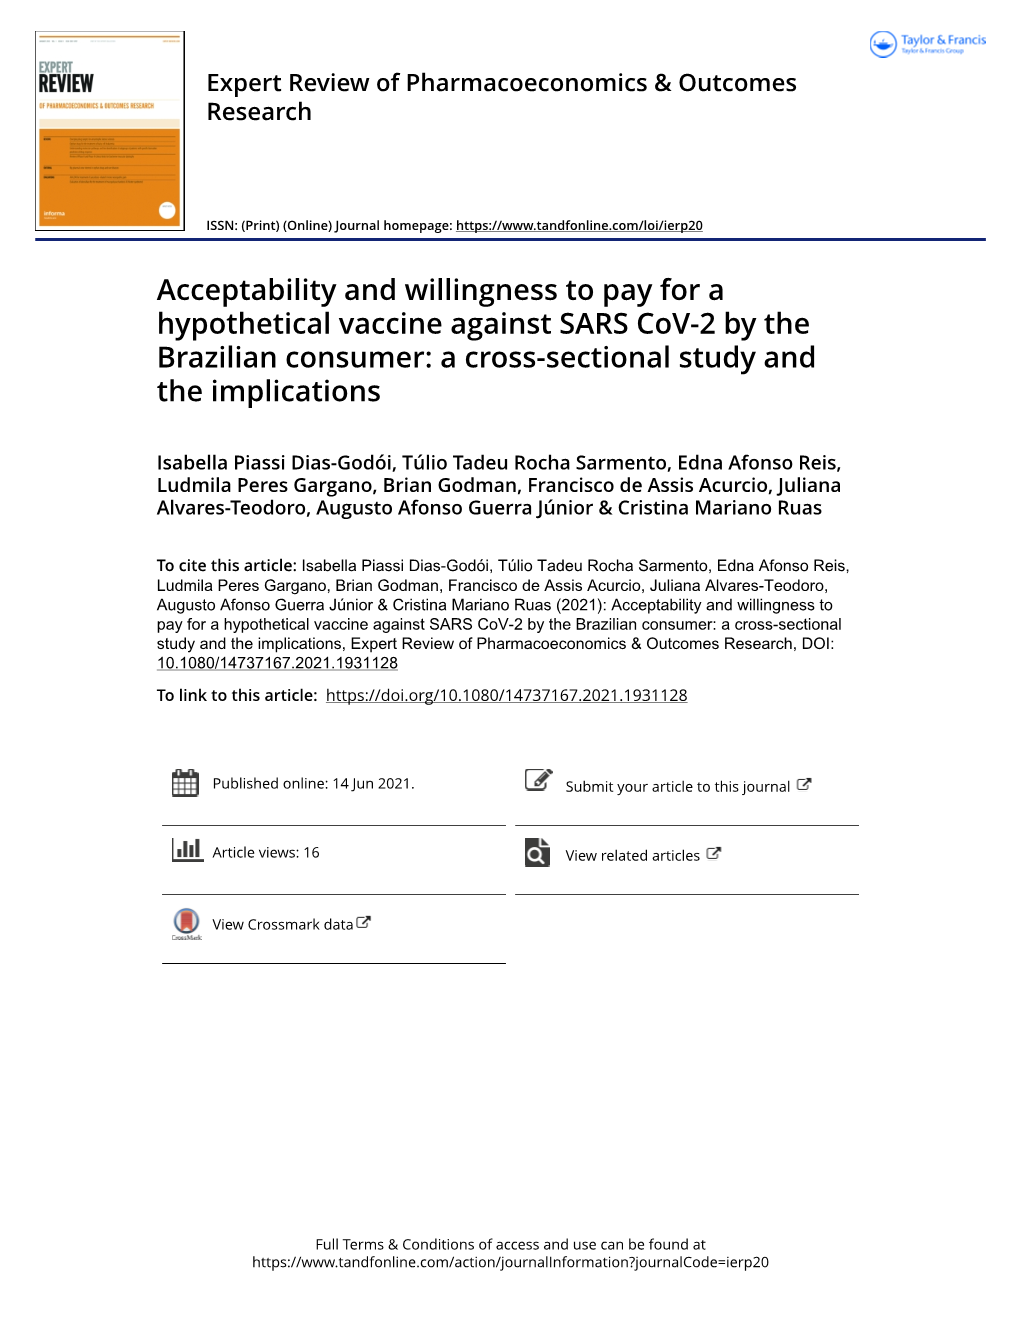 Acceptability and Willingness to Pay for a Hypothetical Vaccine Against SARS Cov-2 by the Brazilian Consumer: a Cross-Sectional Study and the Implications